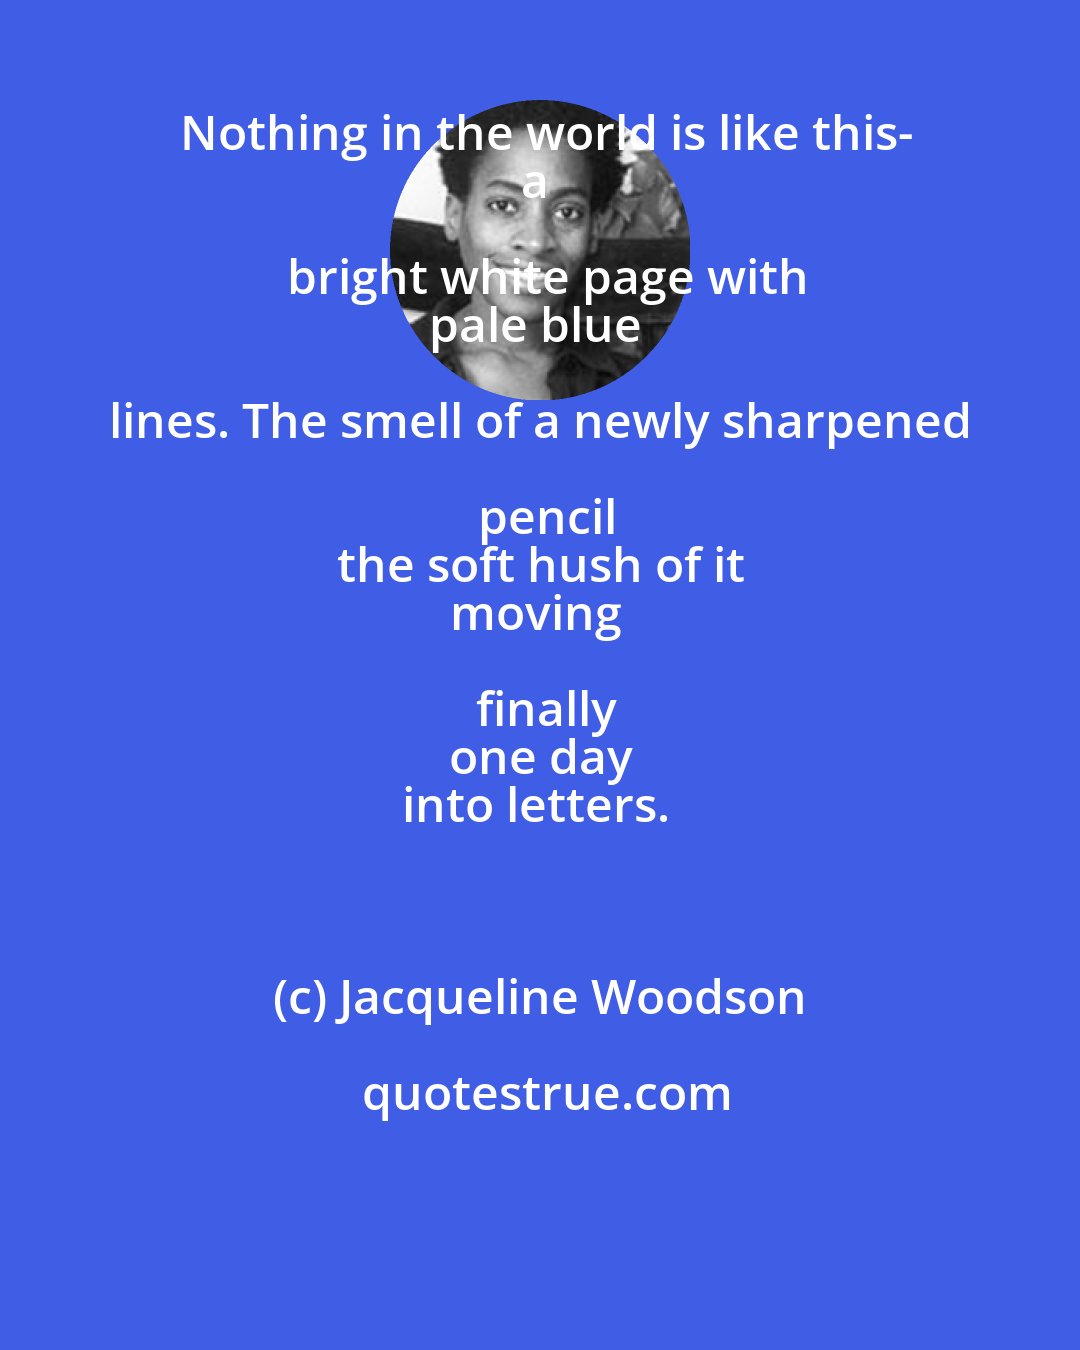 Jacqueline Woodson: Nothing in the world is like this-
a bright white page with
pale blue lines. The smell of a newly sharpened pencil
the soft hush of it
moving finally
one day
into letters.